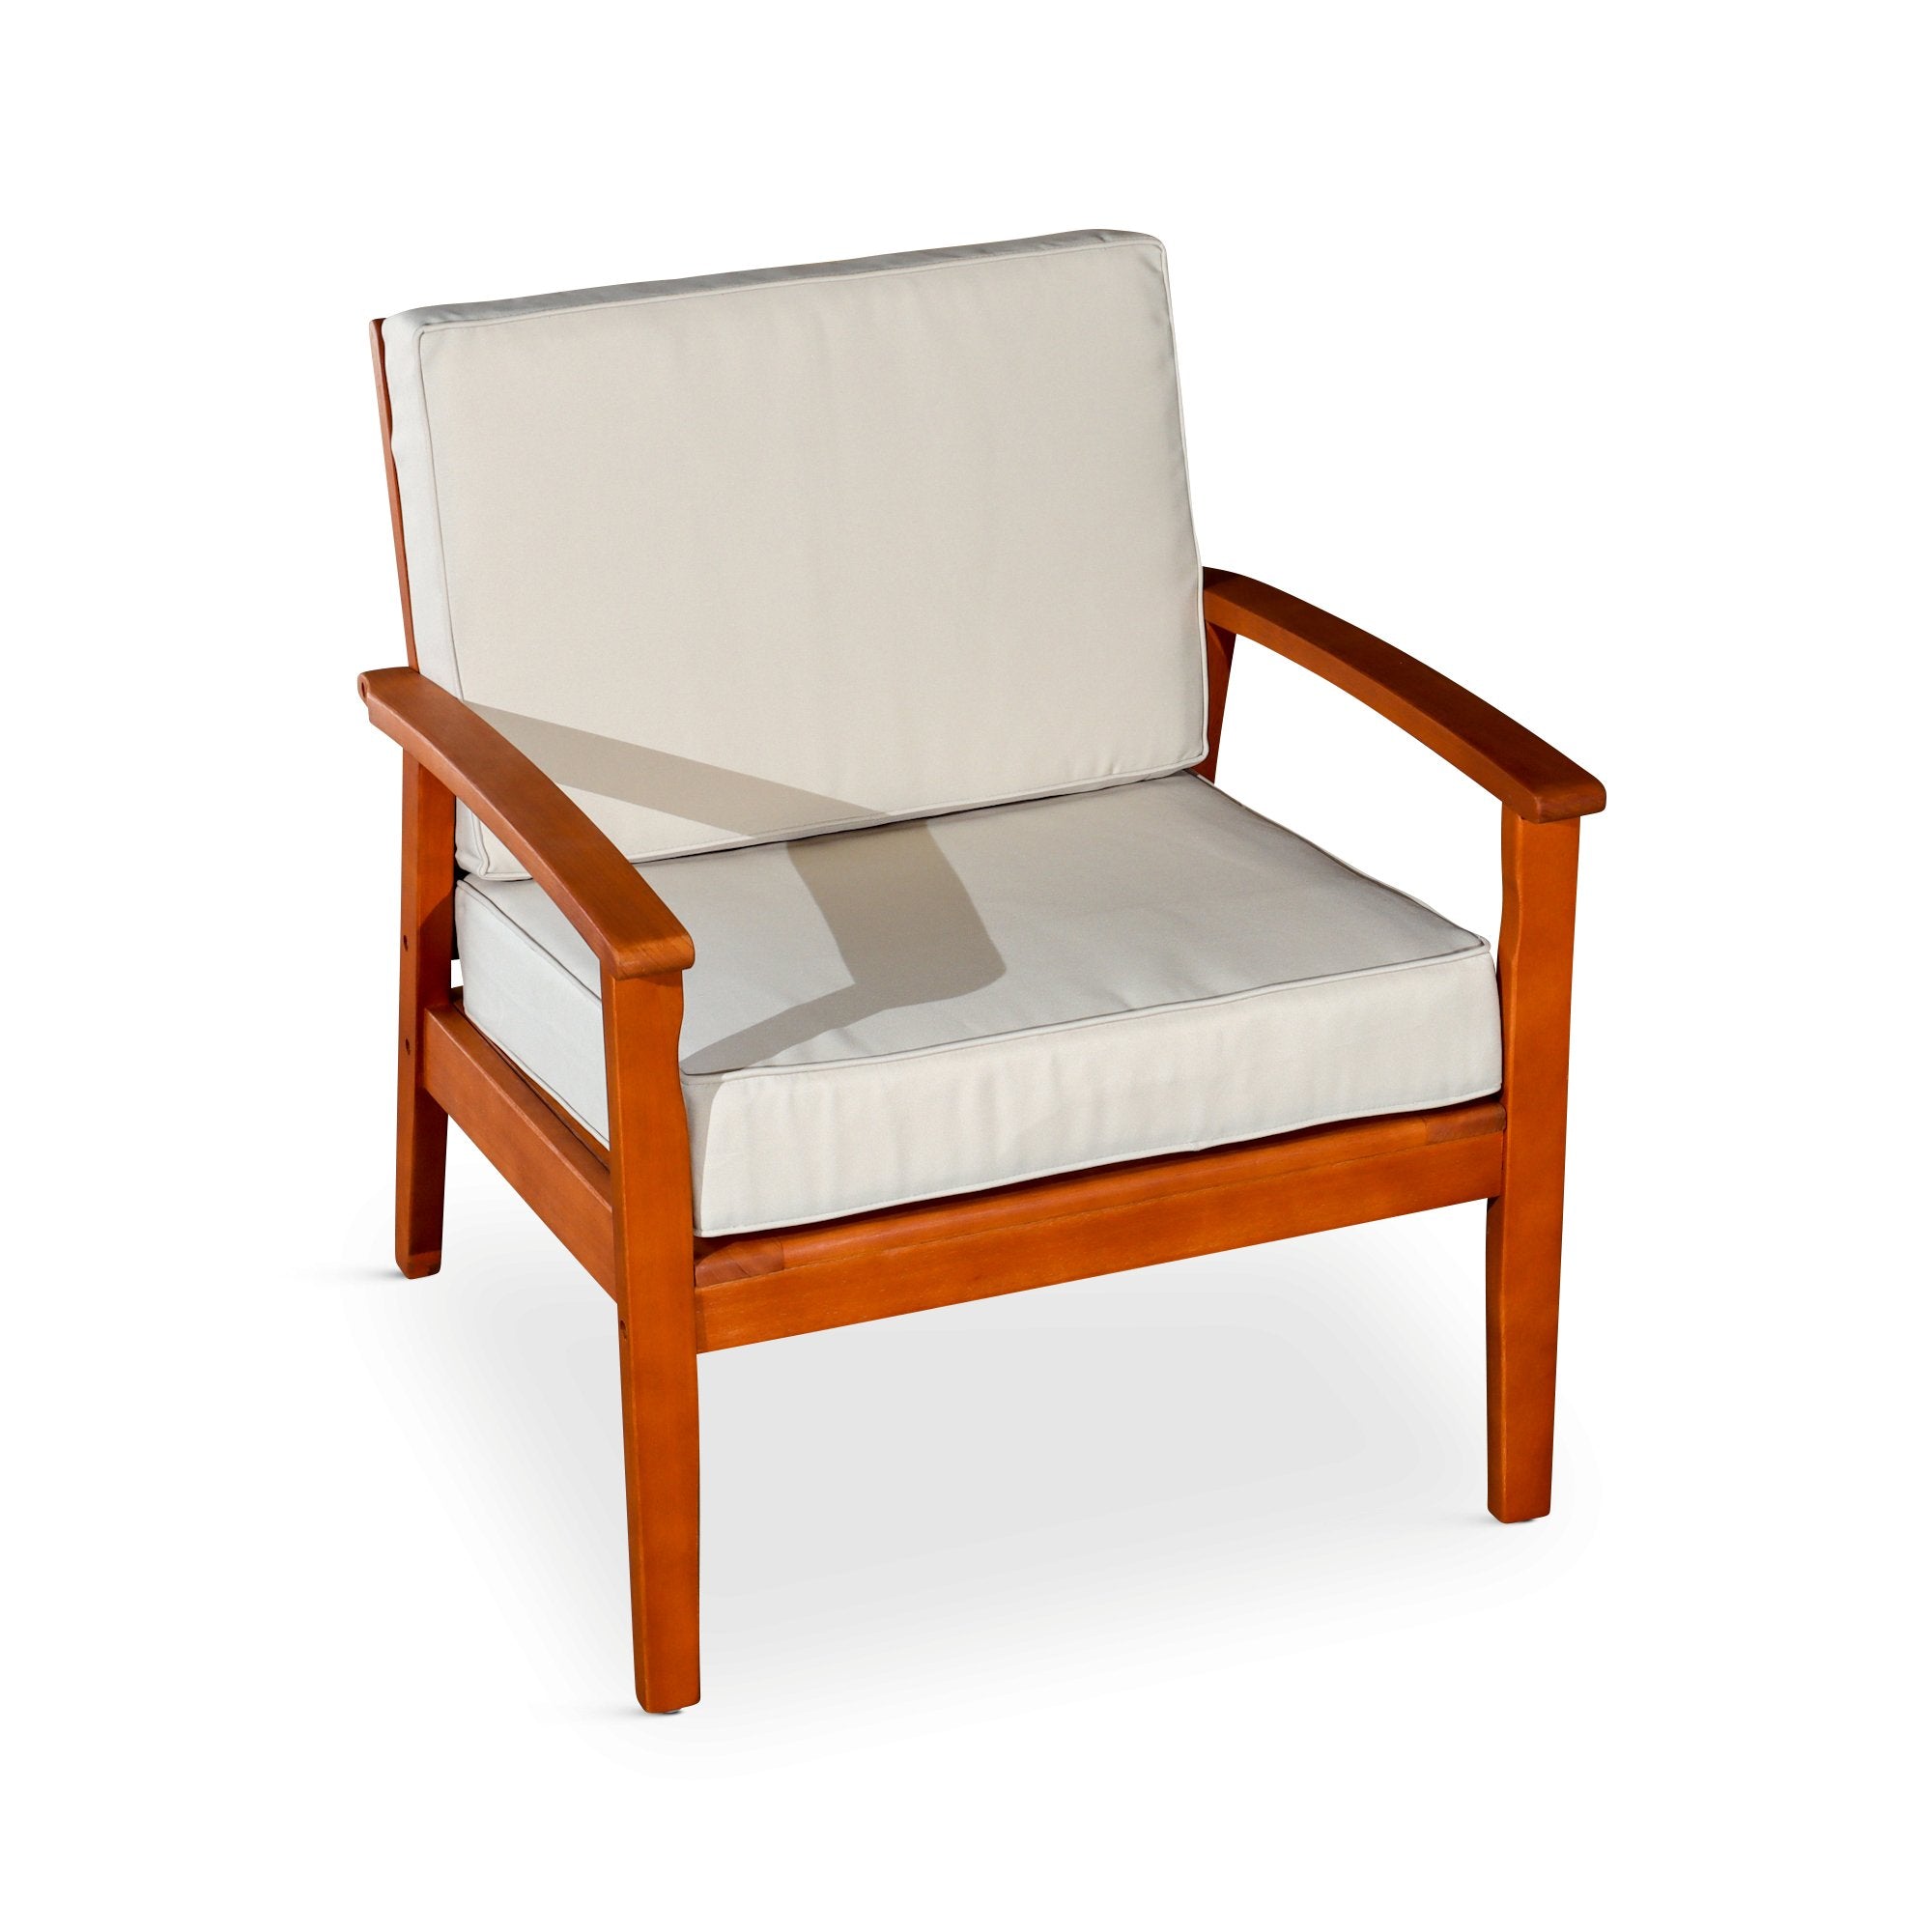 Deep Seat Outdoor Chair, Natural Oil Finish, Sand Cushion - Tuesday Morning-Chairs & Seating